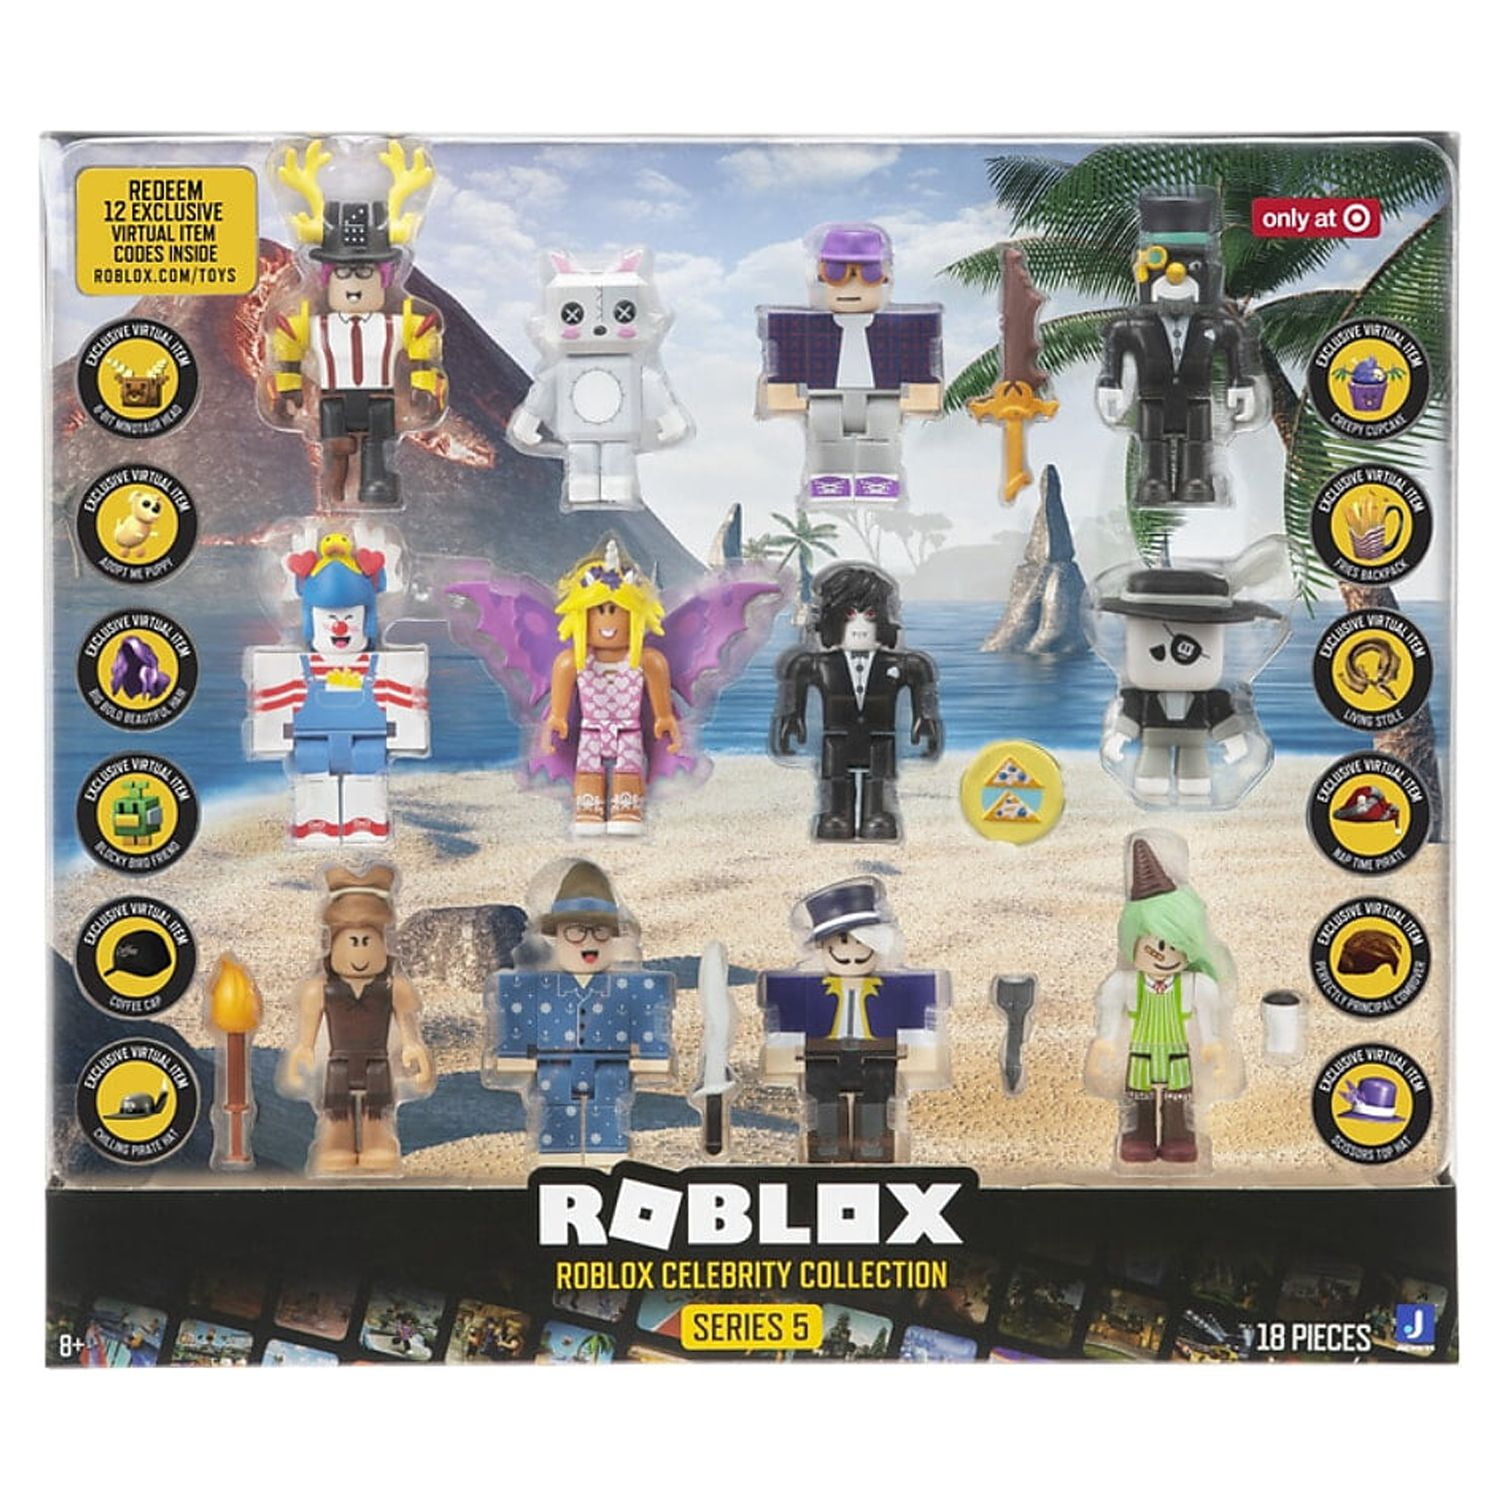 Roblox Toys and Kugel Water Guns: Exploring the World of Digital